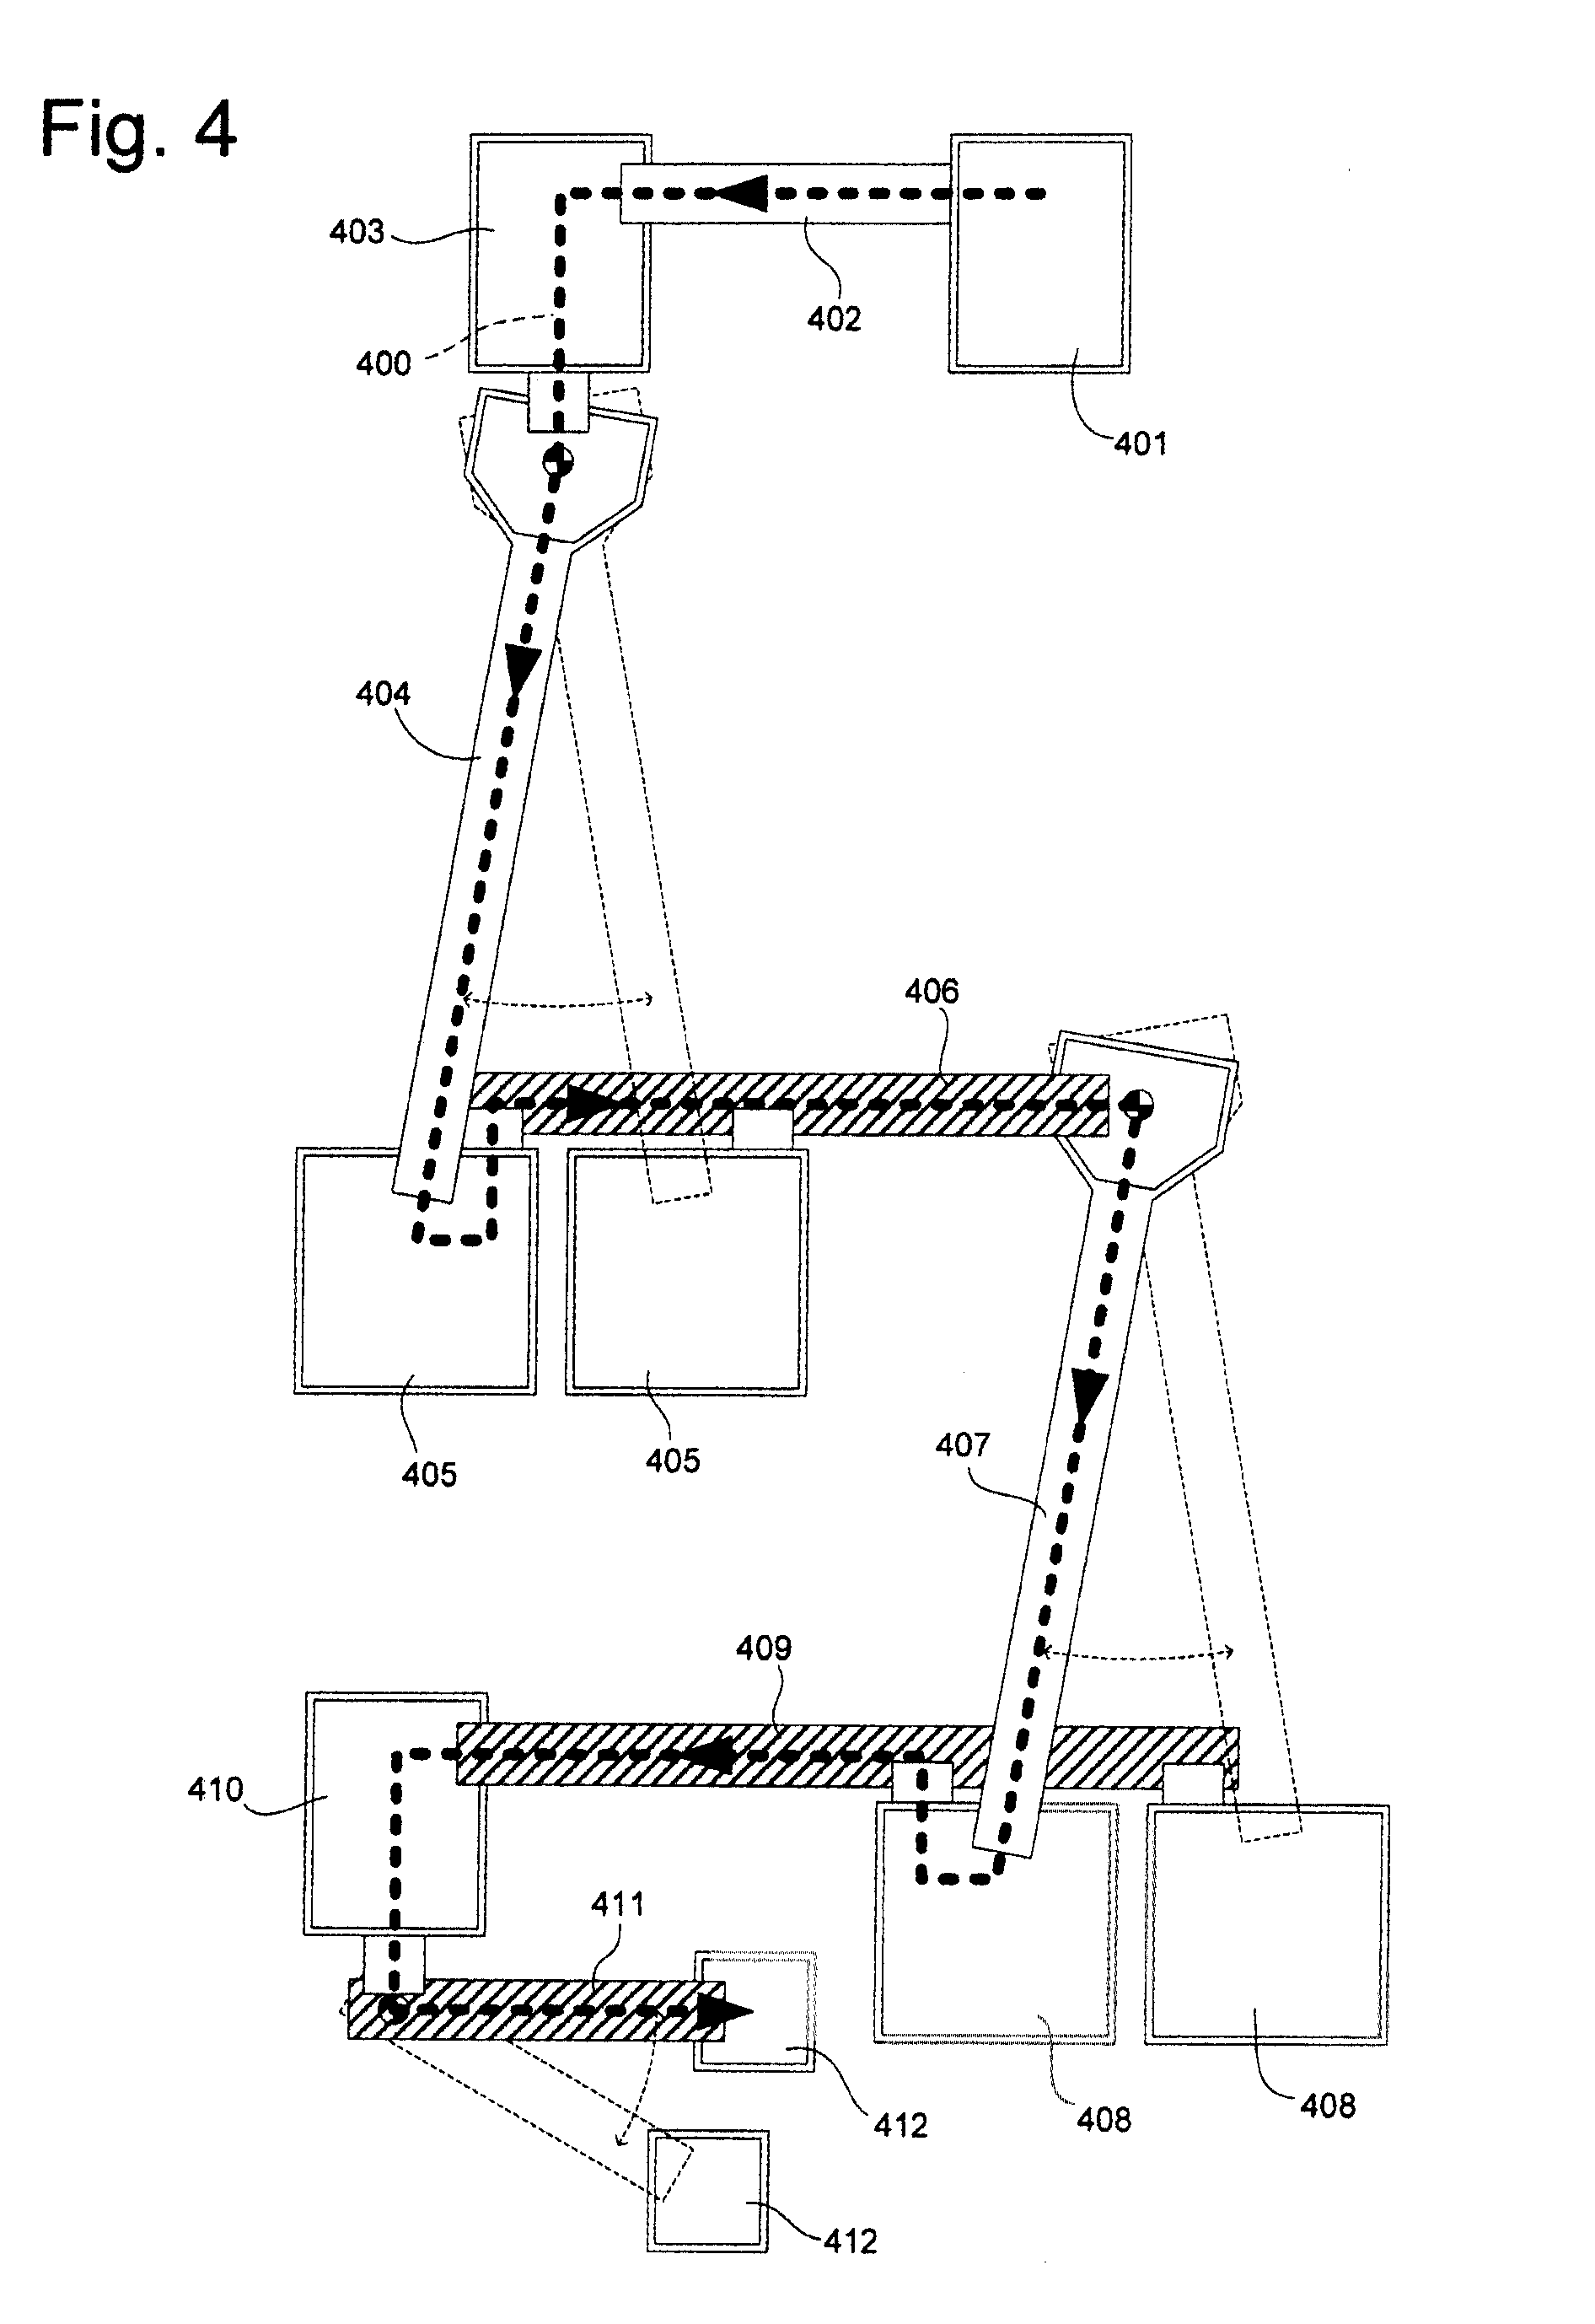 Method and Apparatus for Producing Cooked Bacon Using Starter Cultures